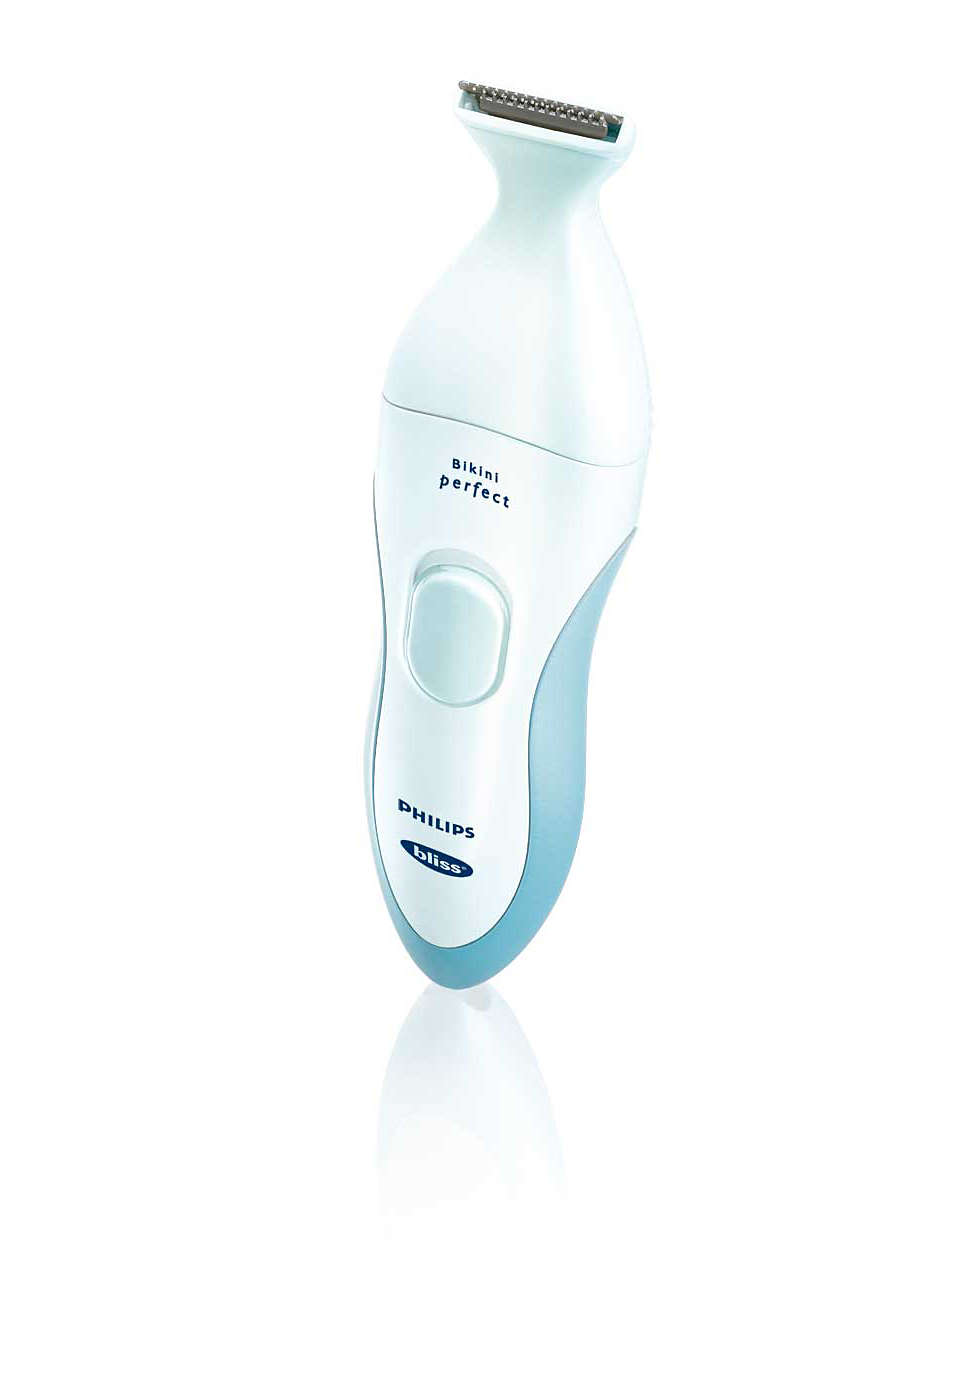 Spa-at-home grooming system